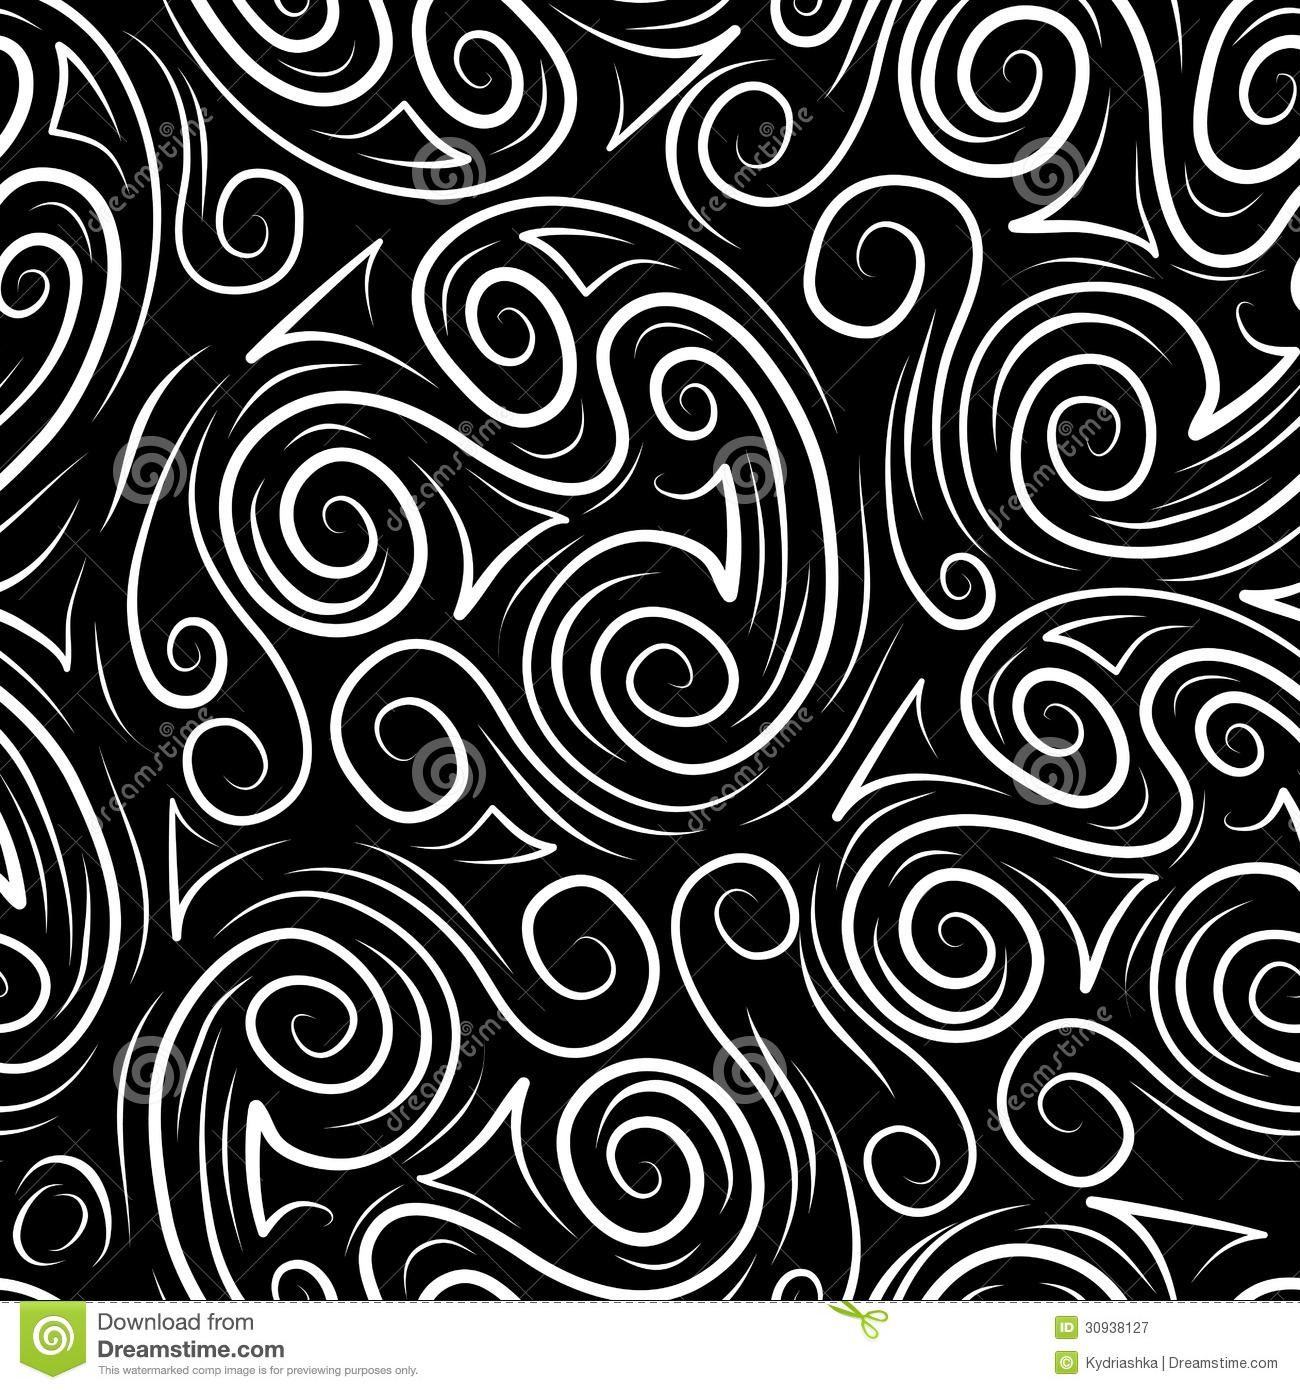 Abstract Swirl Patterns